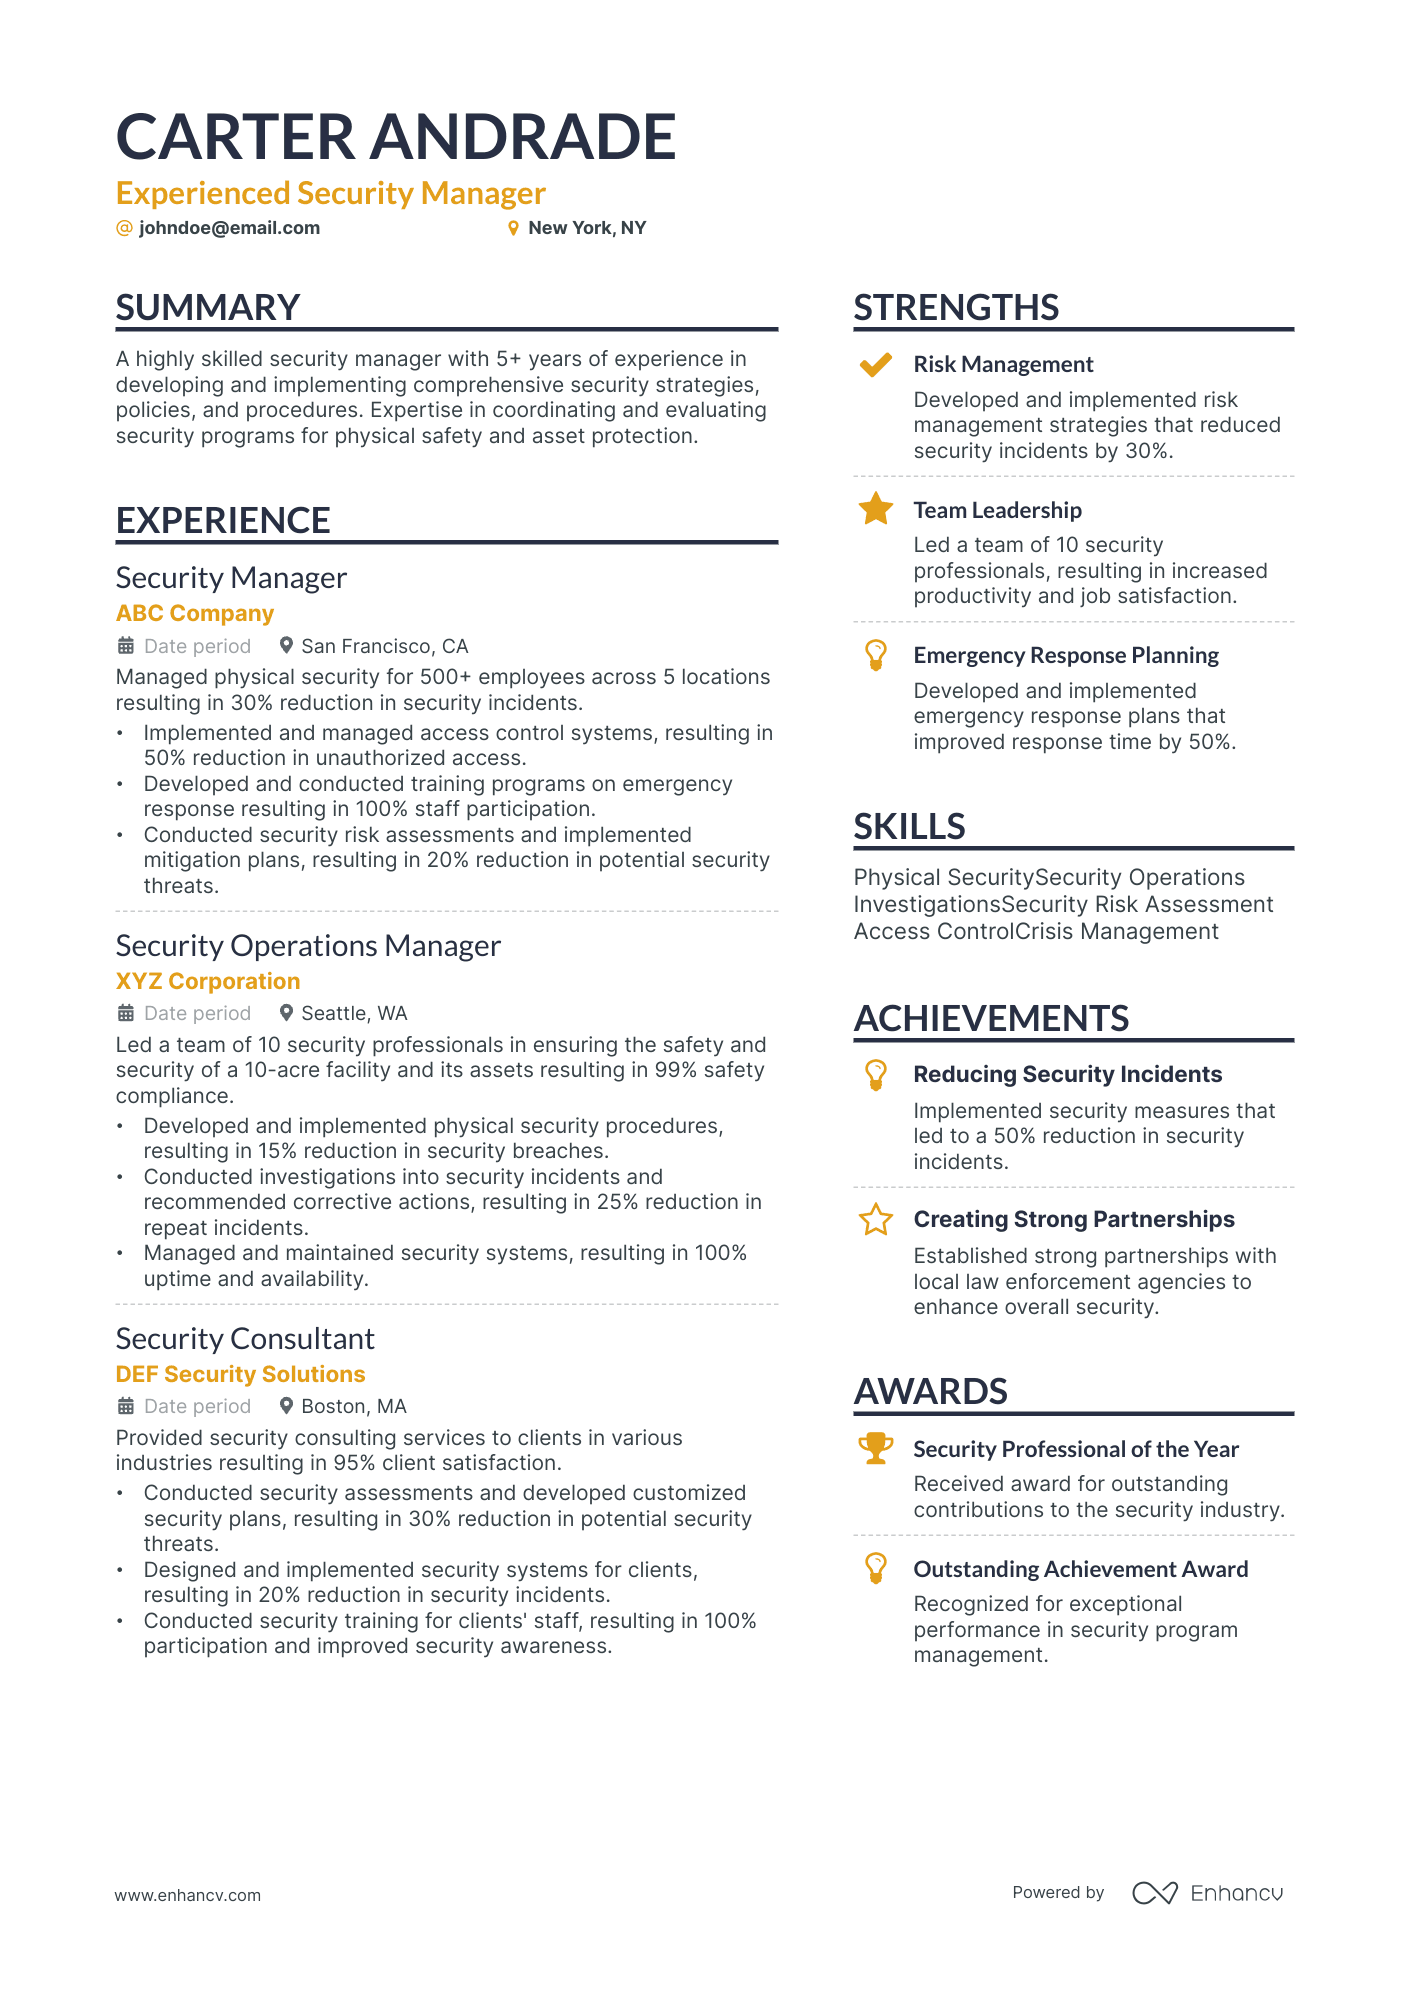 Security Manager resume example